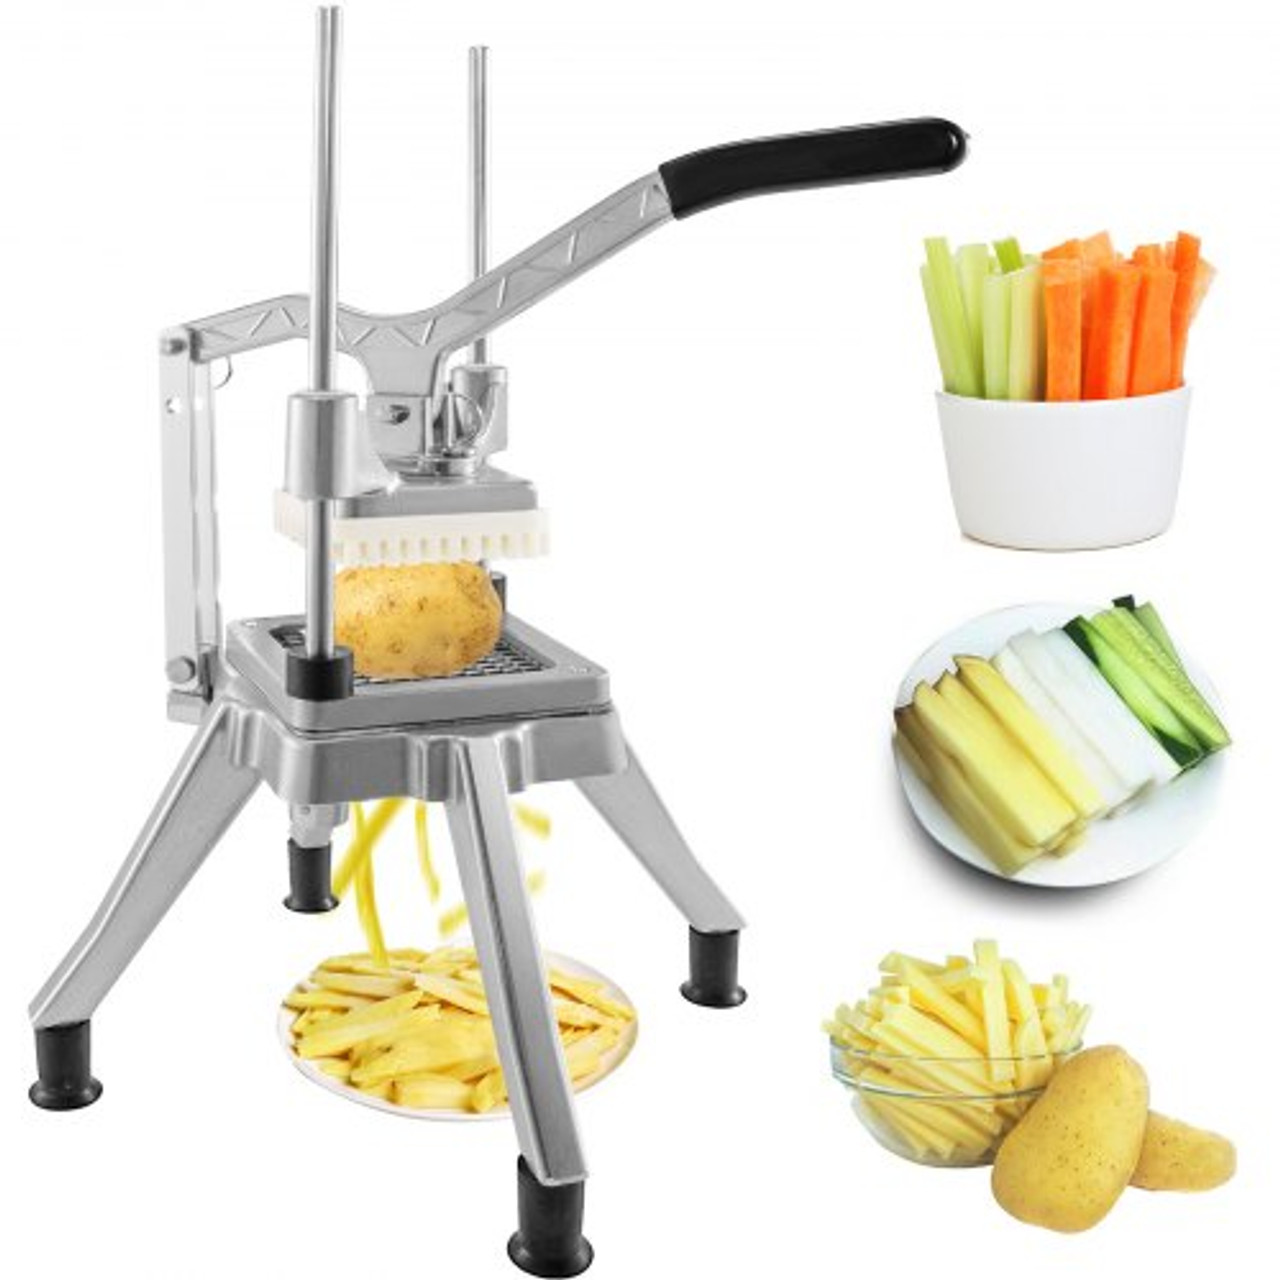 Commercial Vegetable Fruit Chopper 3/8? Blade Professional Food Dicer Kattex French Fry Cutter Onion Slicer Stainless Steel for Tomato Peppers Potato Mushroom Upgrade Style 3/8"